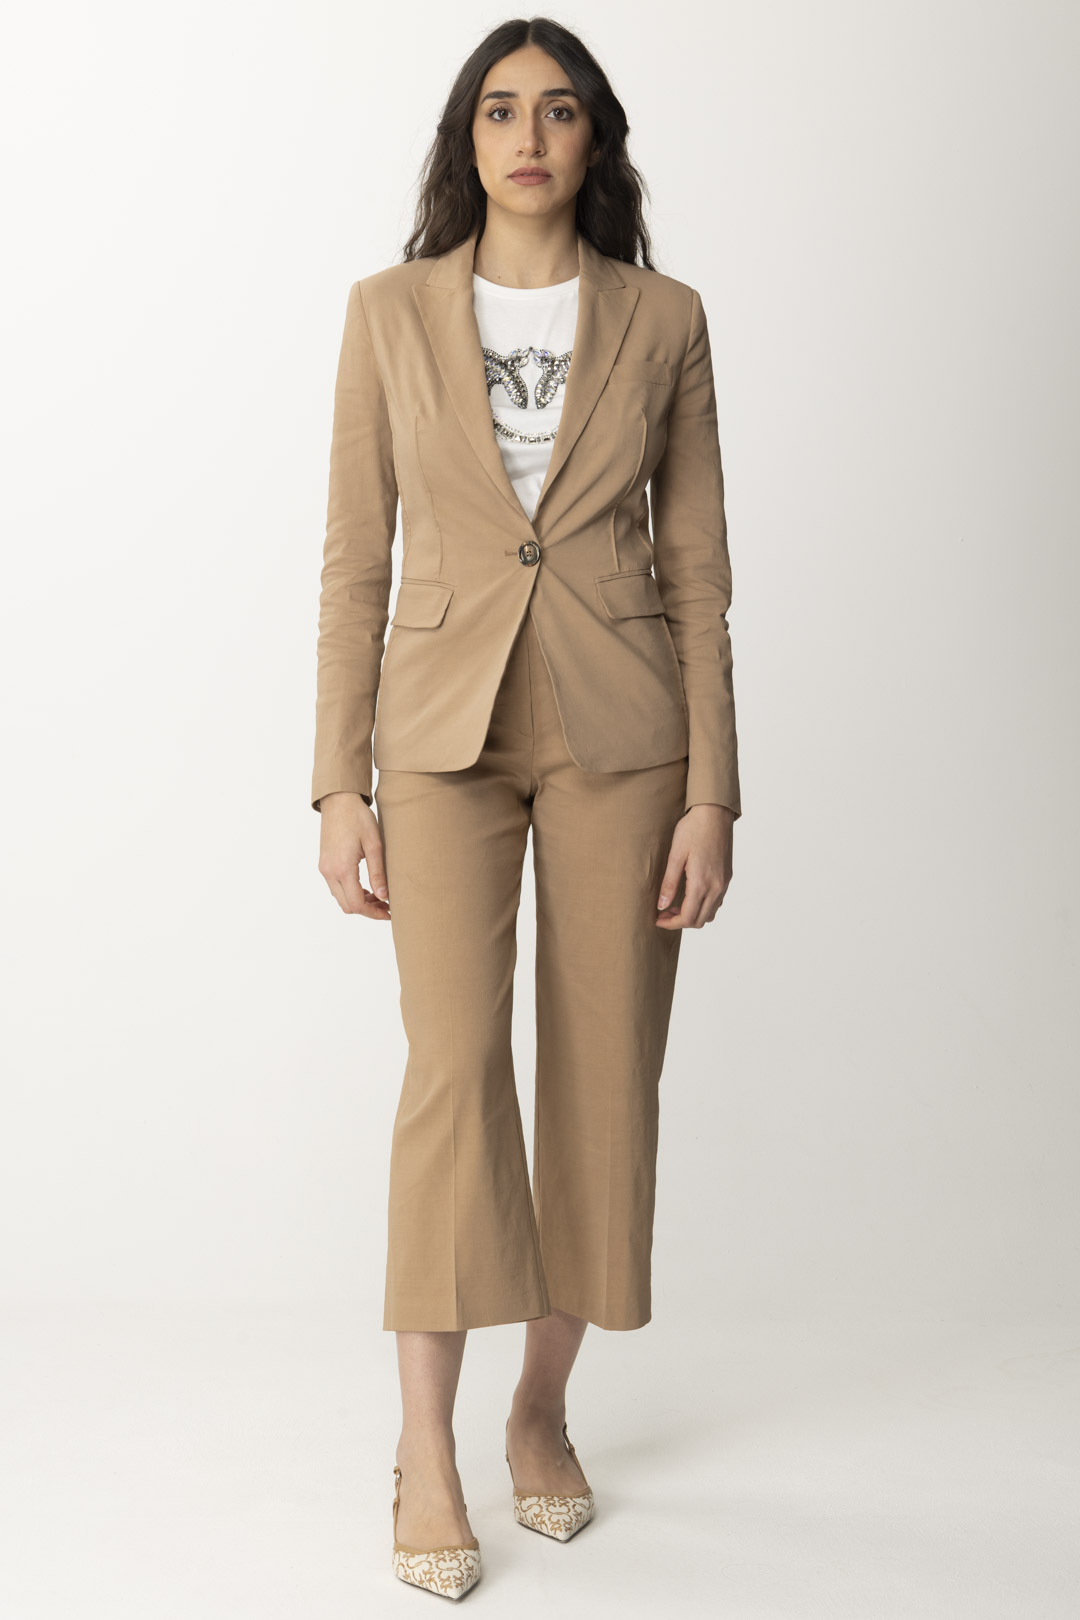 Preview: Pinko Single-Breasted Stretch Linen Jacket BEIGE BRUNO FULVO